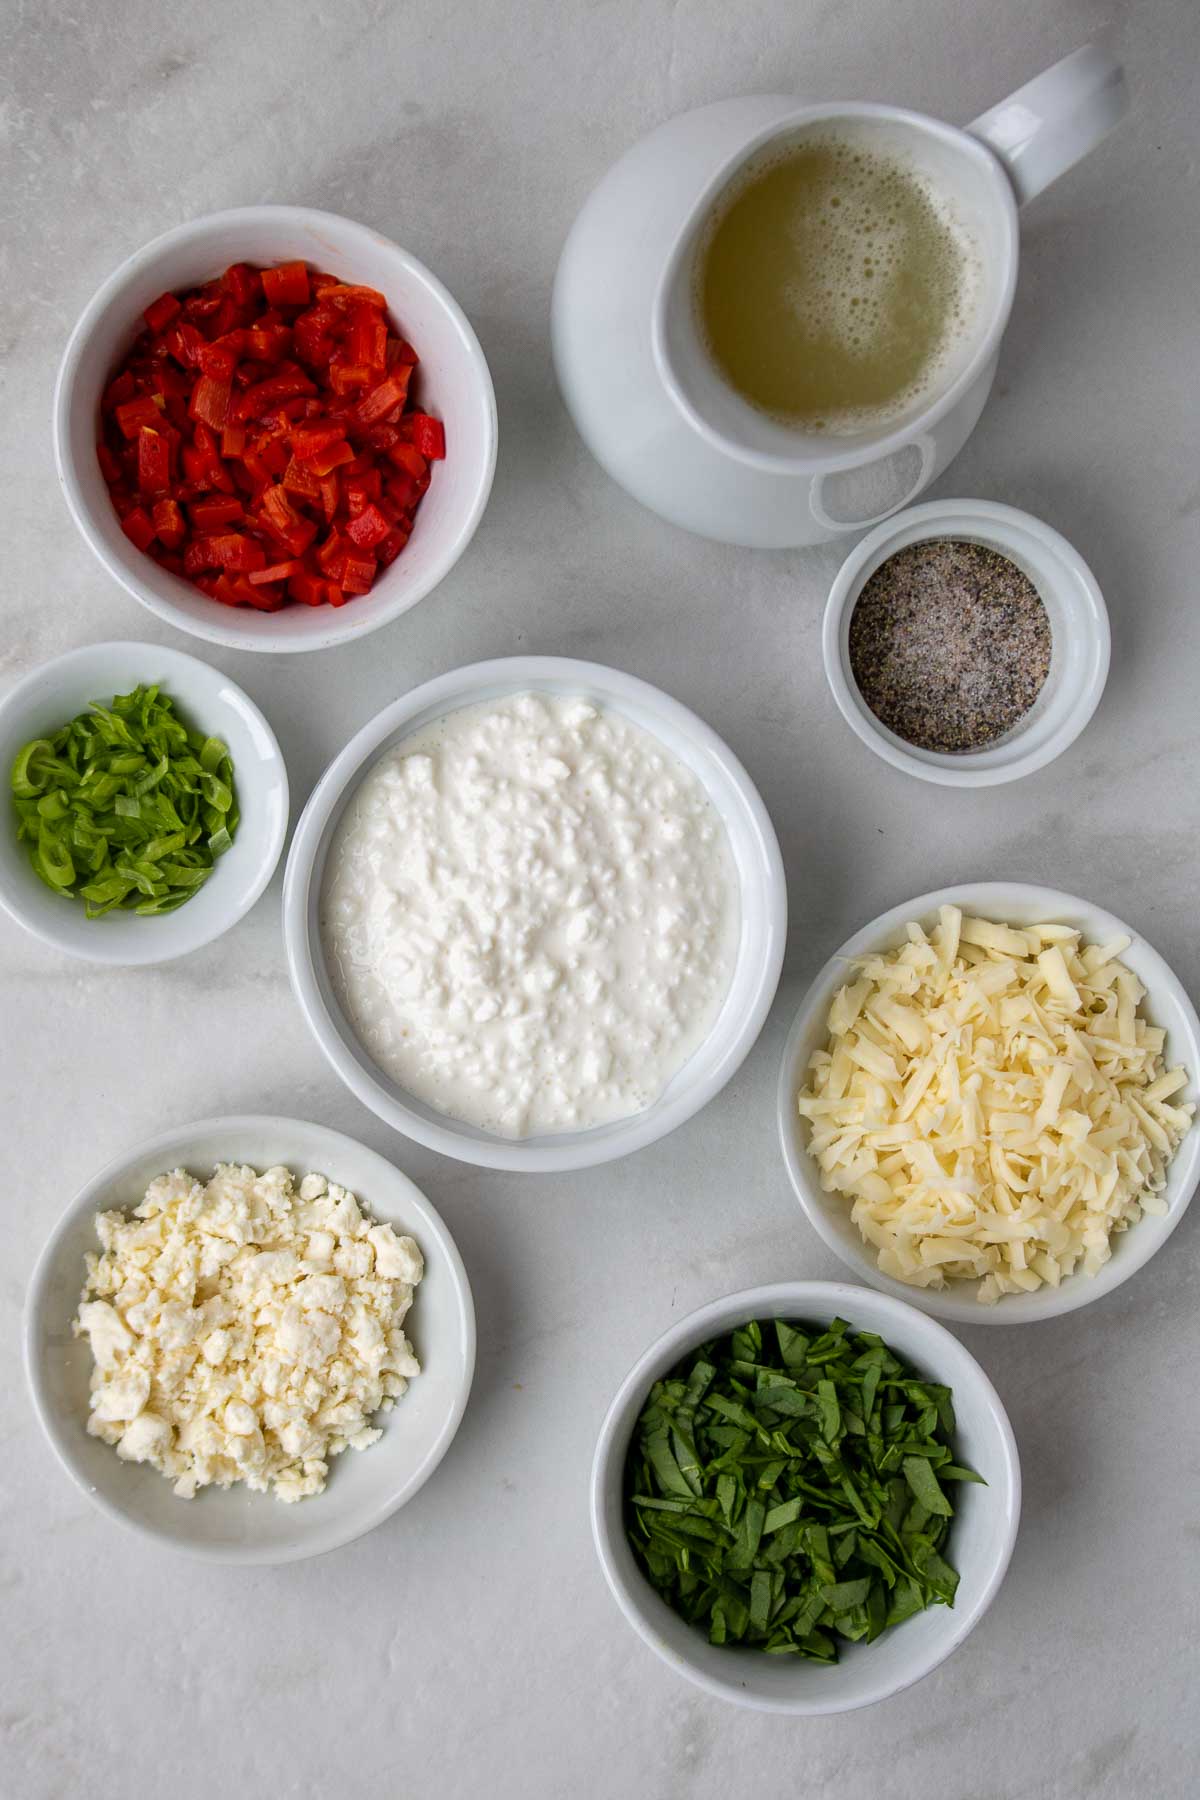 Ingredients for egg white bites: liquid egg whites, cottage cheese, shredded Monterey jack cheese, feta cheese, green onion, spinach, roasted red peppers, cornstarch, salt, and pepper.